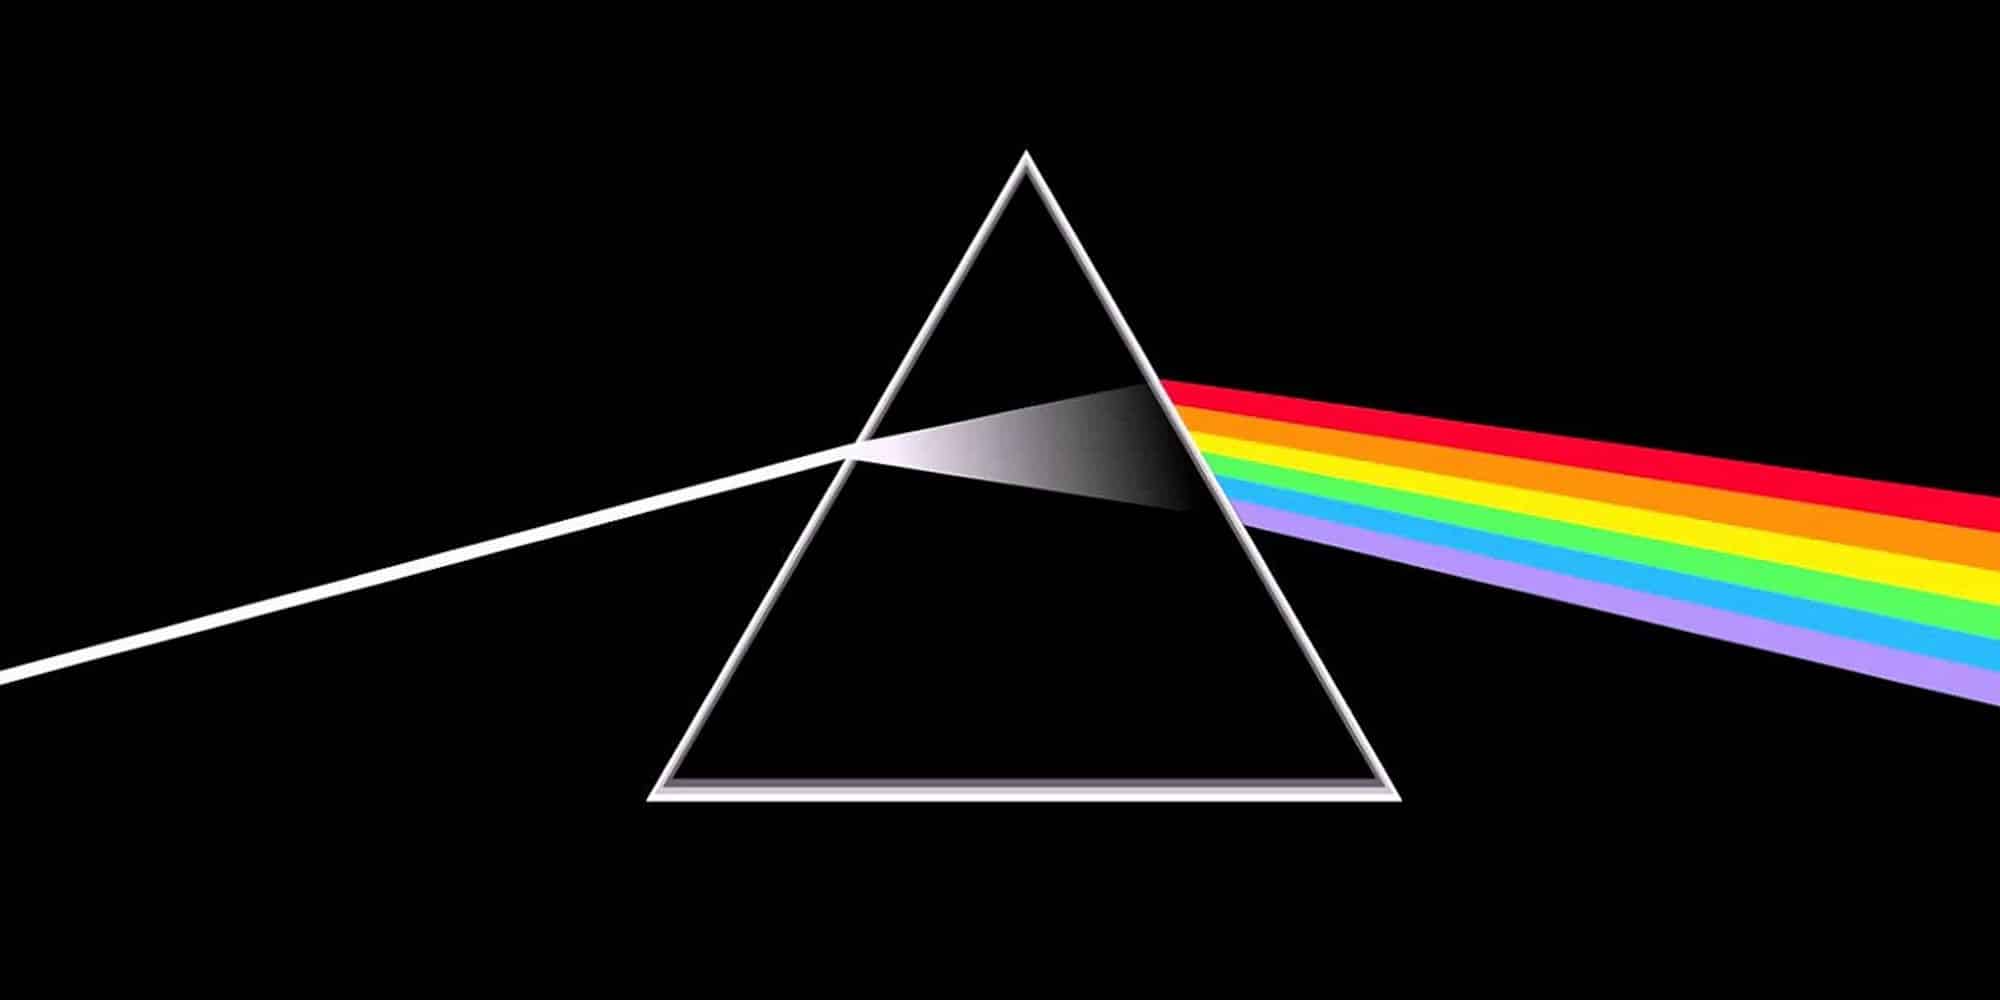 The Dark side of the moon